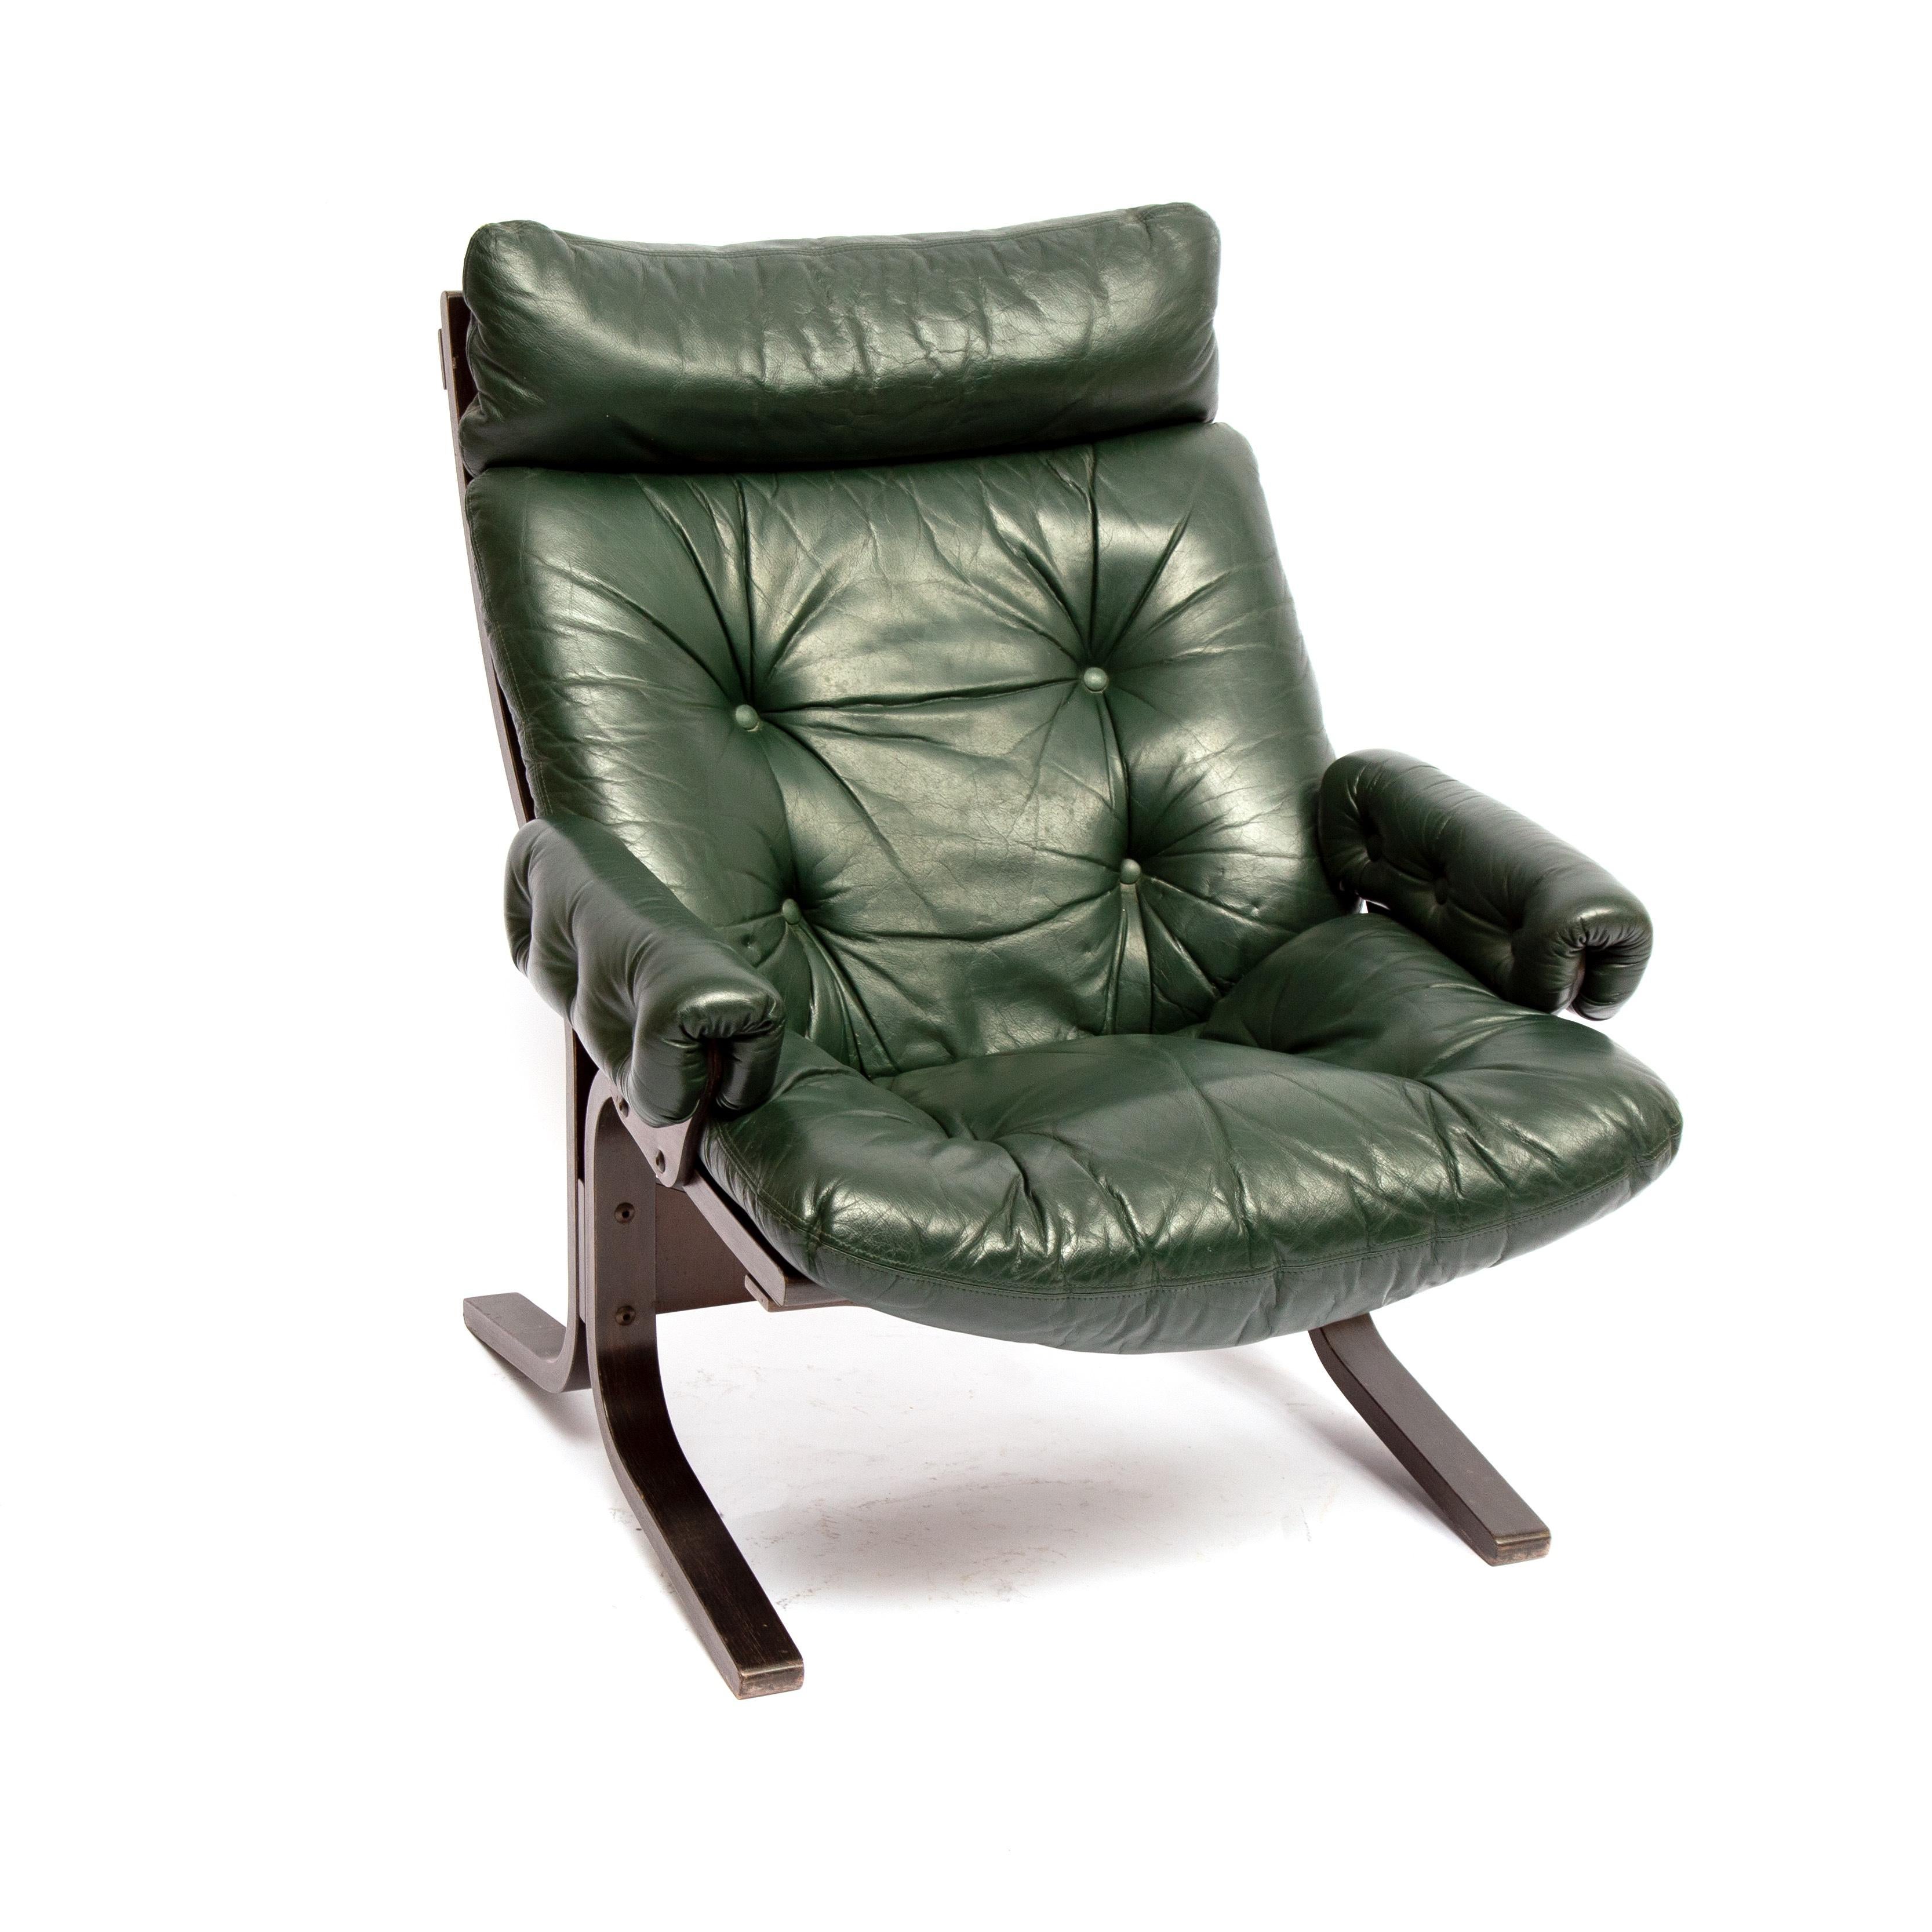 Ingmar Relling style easy green leather lounge chair. Upholstery: original, dark green leather. Good condition. Given the age normal use traces/ wear, 1970s.